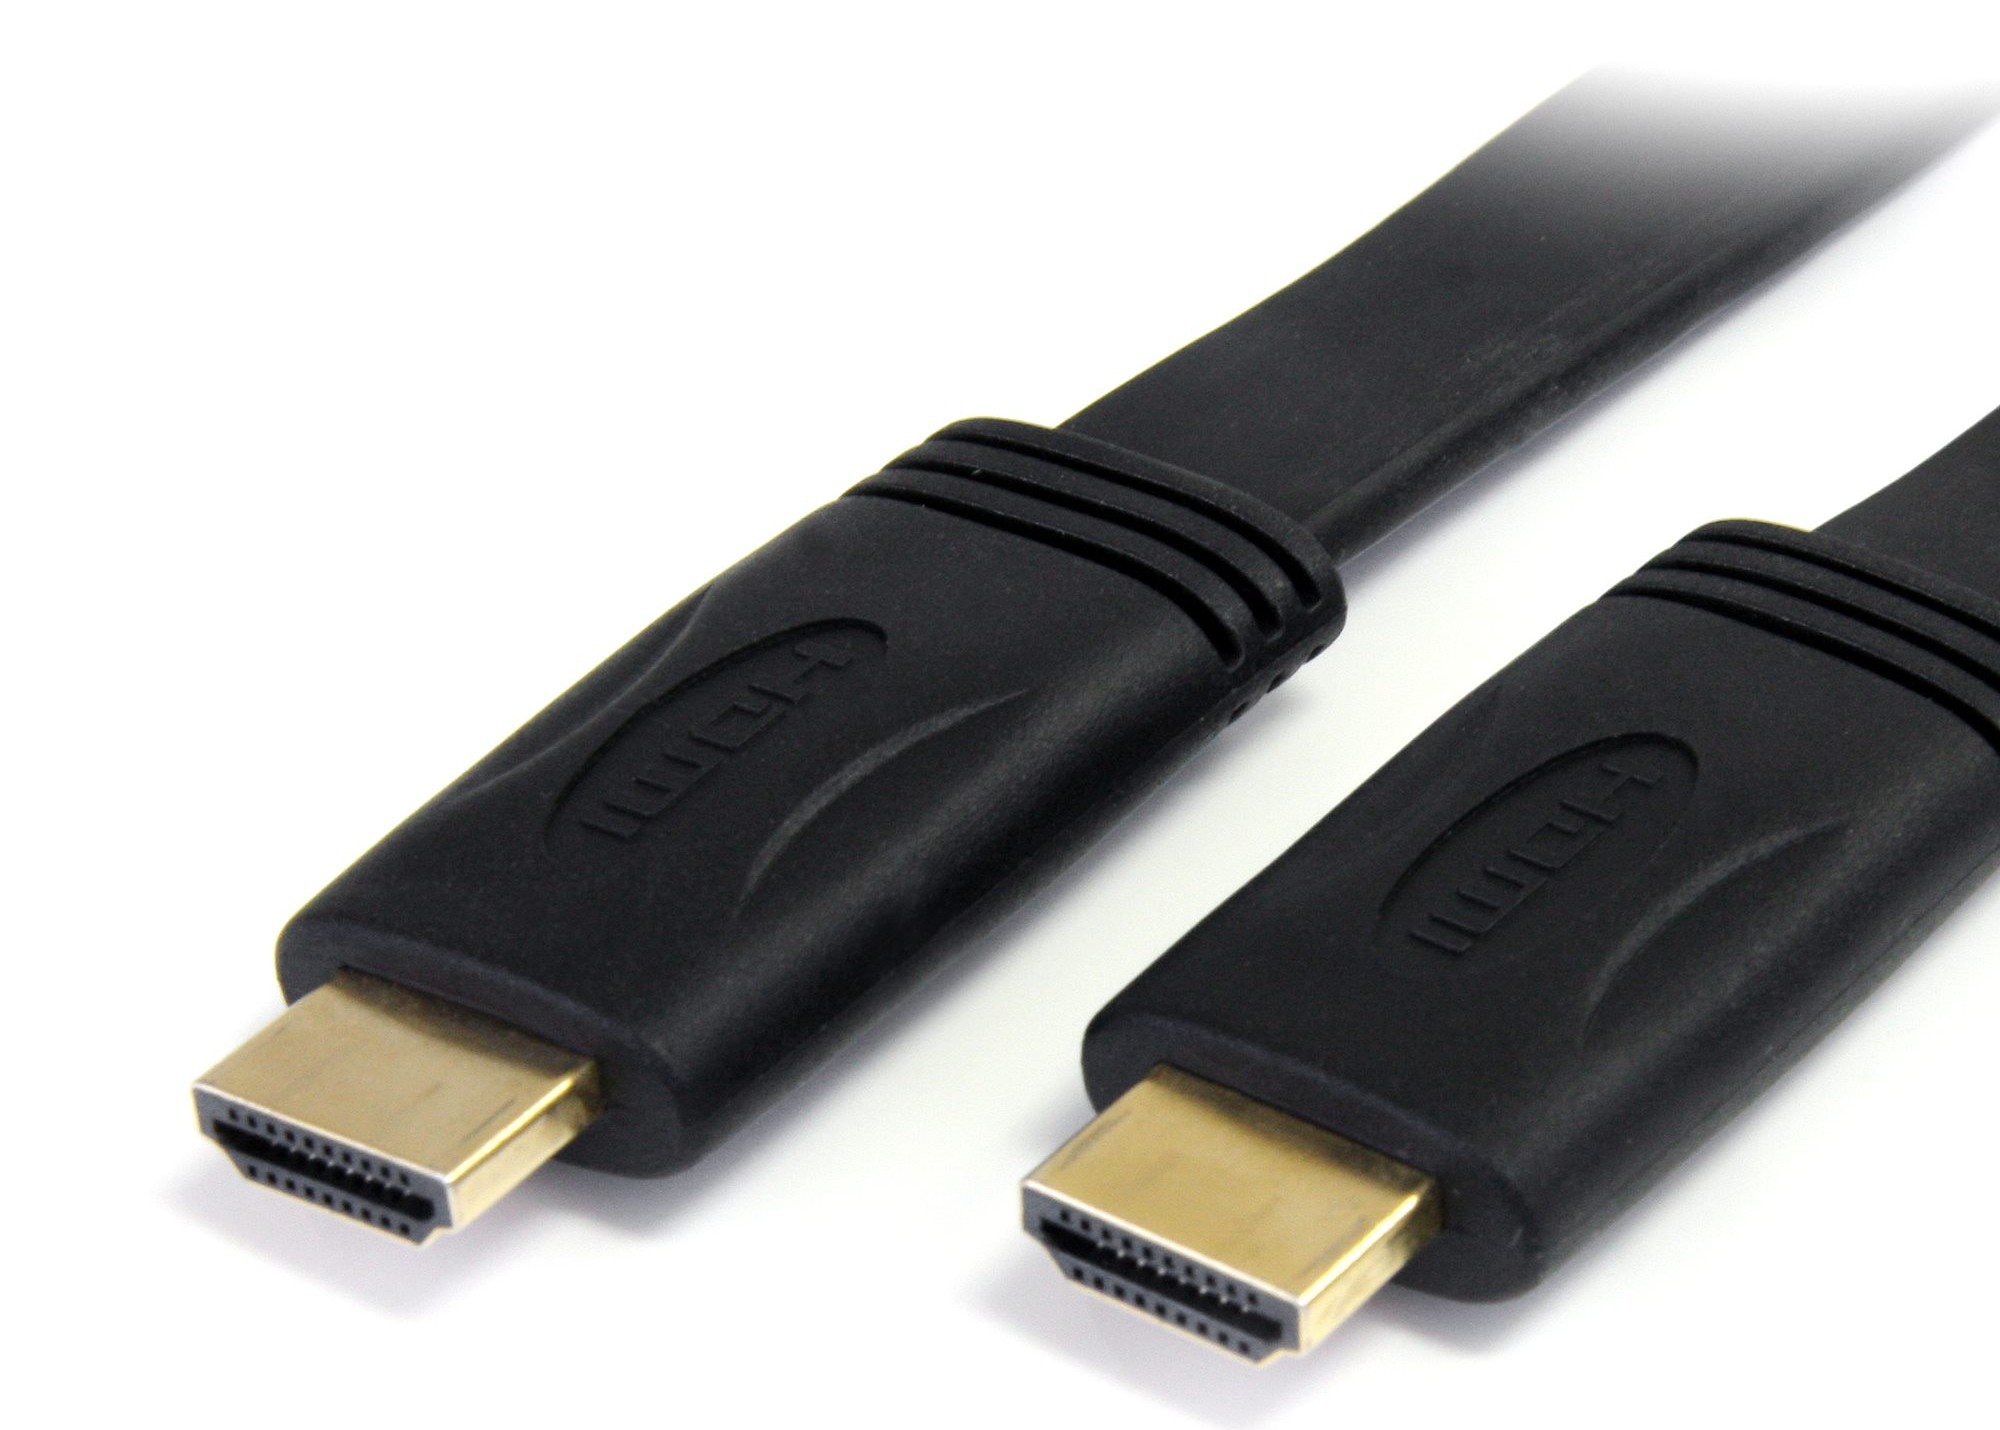 6ft (2m) HDMI Cable - 4K High Speed HDMI Cable with Ethernet - UHD 4K 30Hz  Video - HDMI 1.4 Cable - Ultra HD HDMI Monitors, Projectors, TVs & Displays